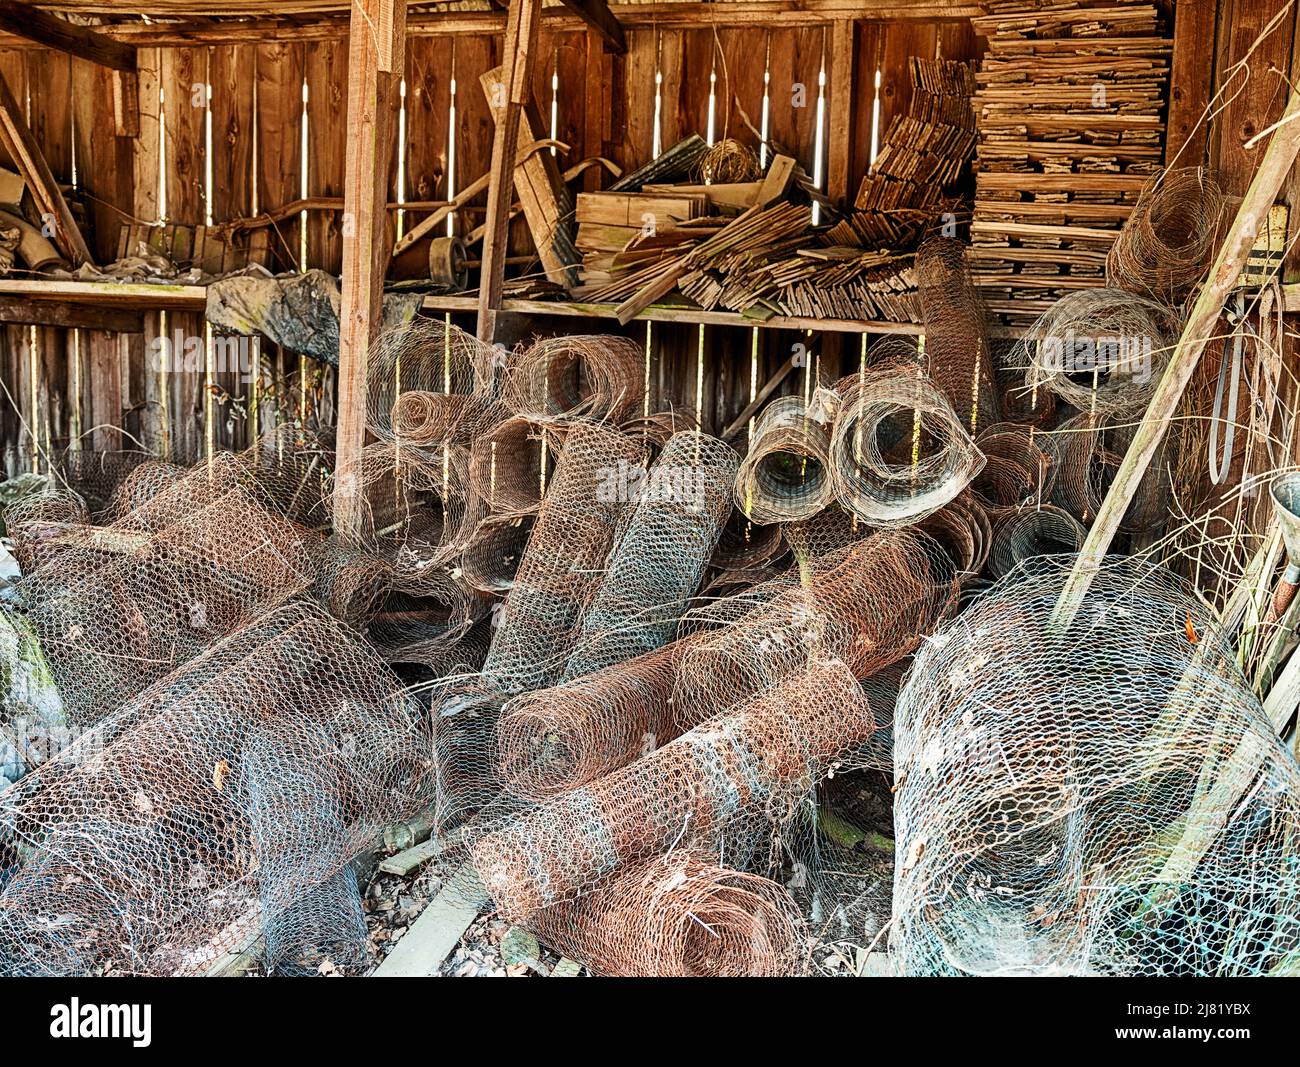 Rolls of rusting fencing material fill an old wood barn in Oregon. Stock Photo